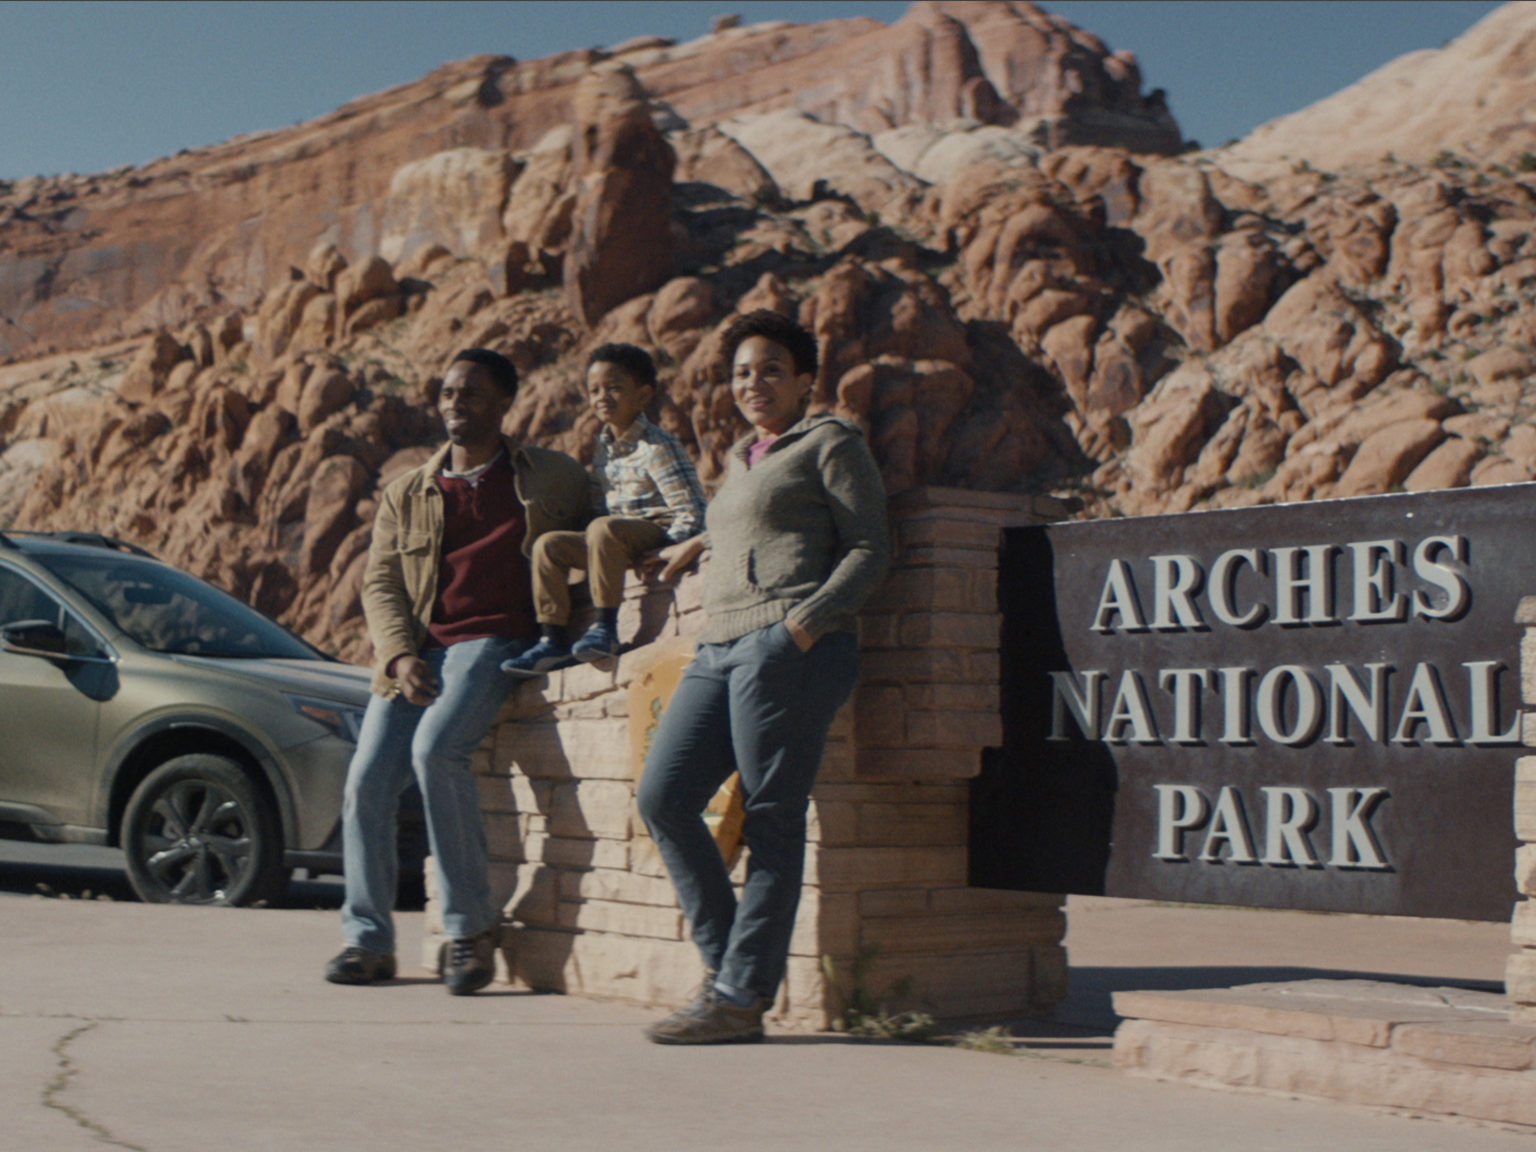 Subaru has launched a new ad campaign showcasing the 2020 Outback.